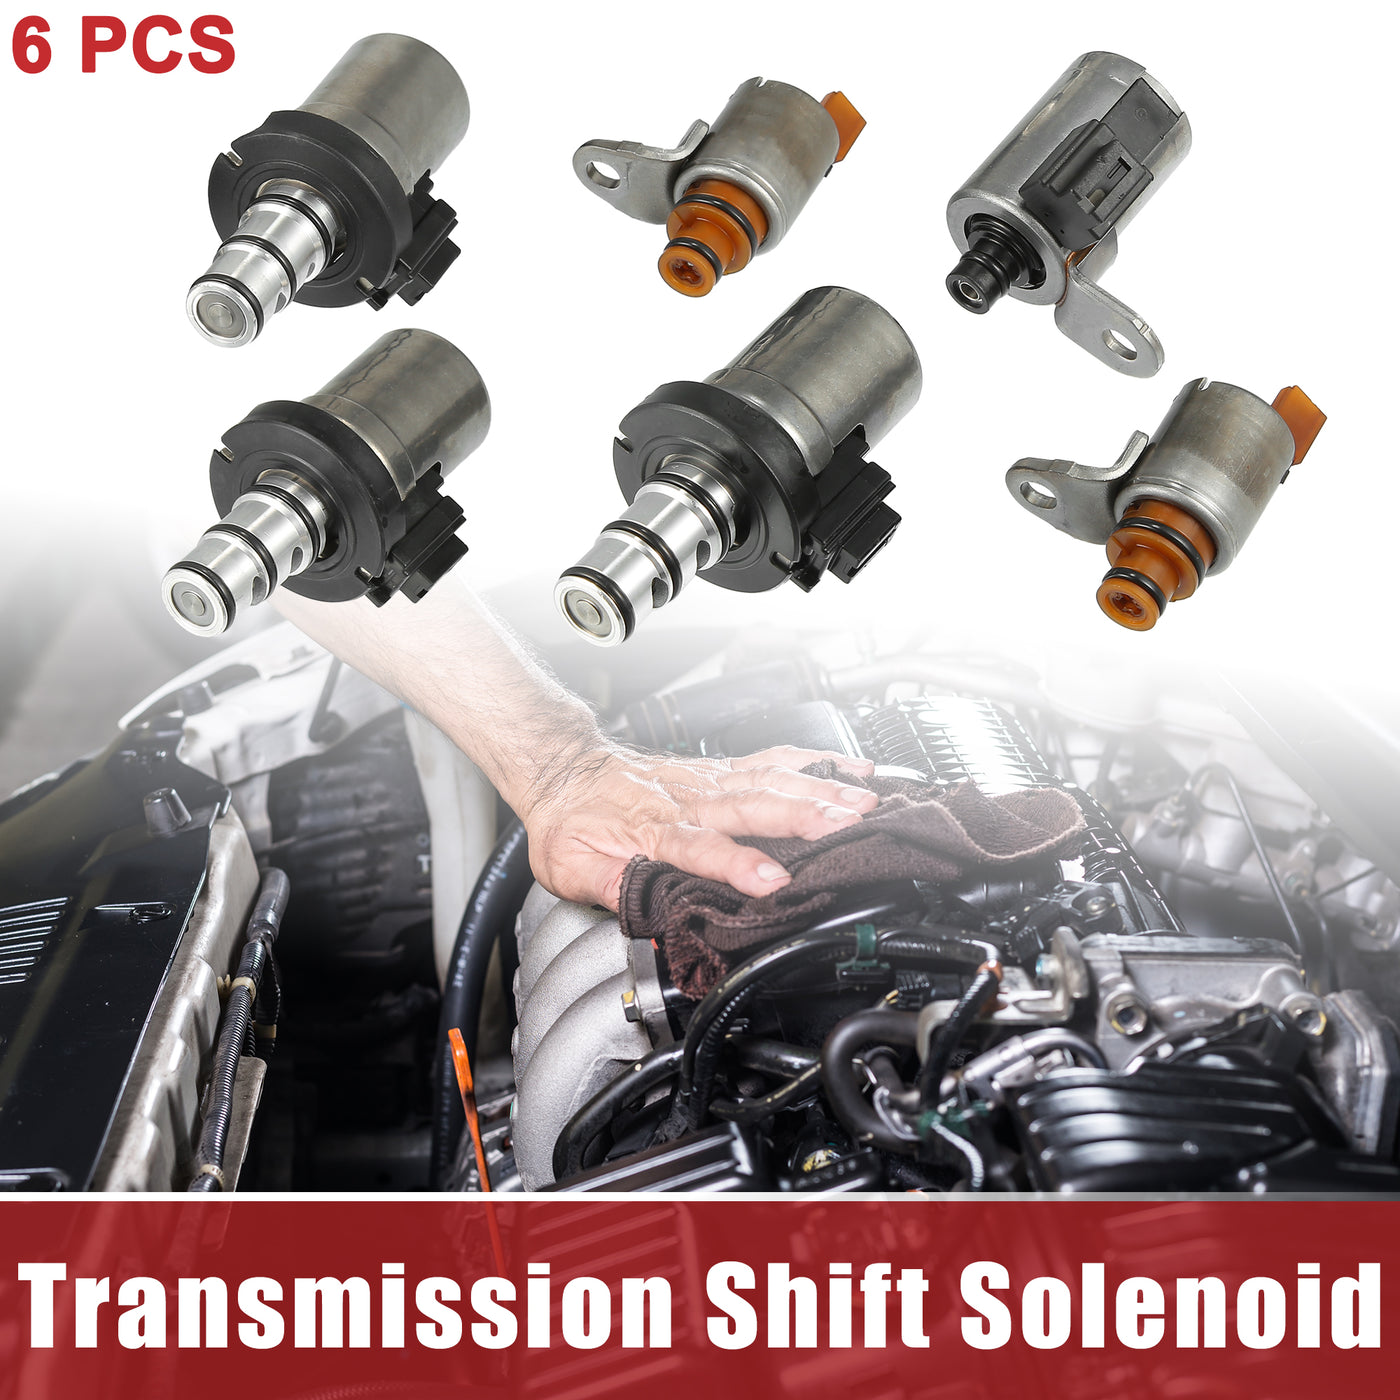 ACROPIX Transmission Shift Solenoid Replacement Fit for Ford for Mazda - Pack of 6 Black Brown